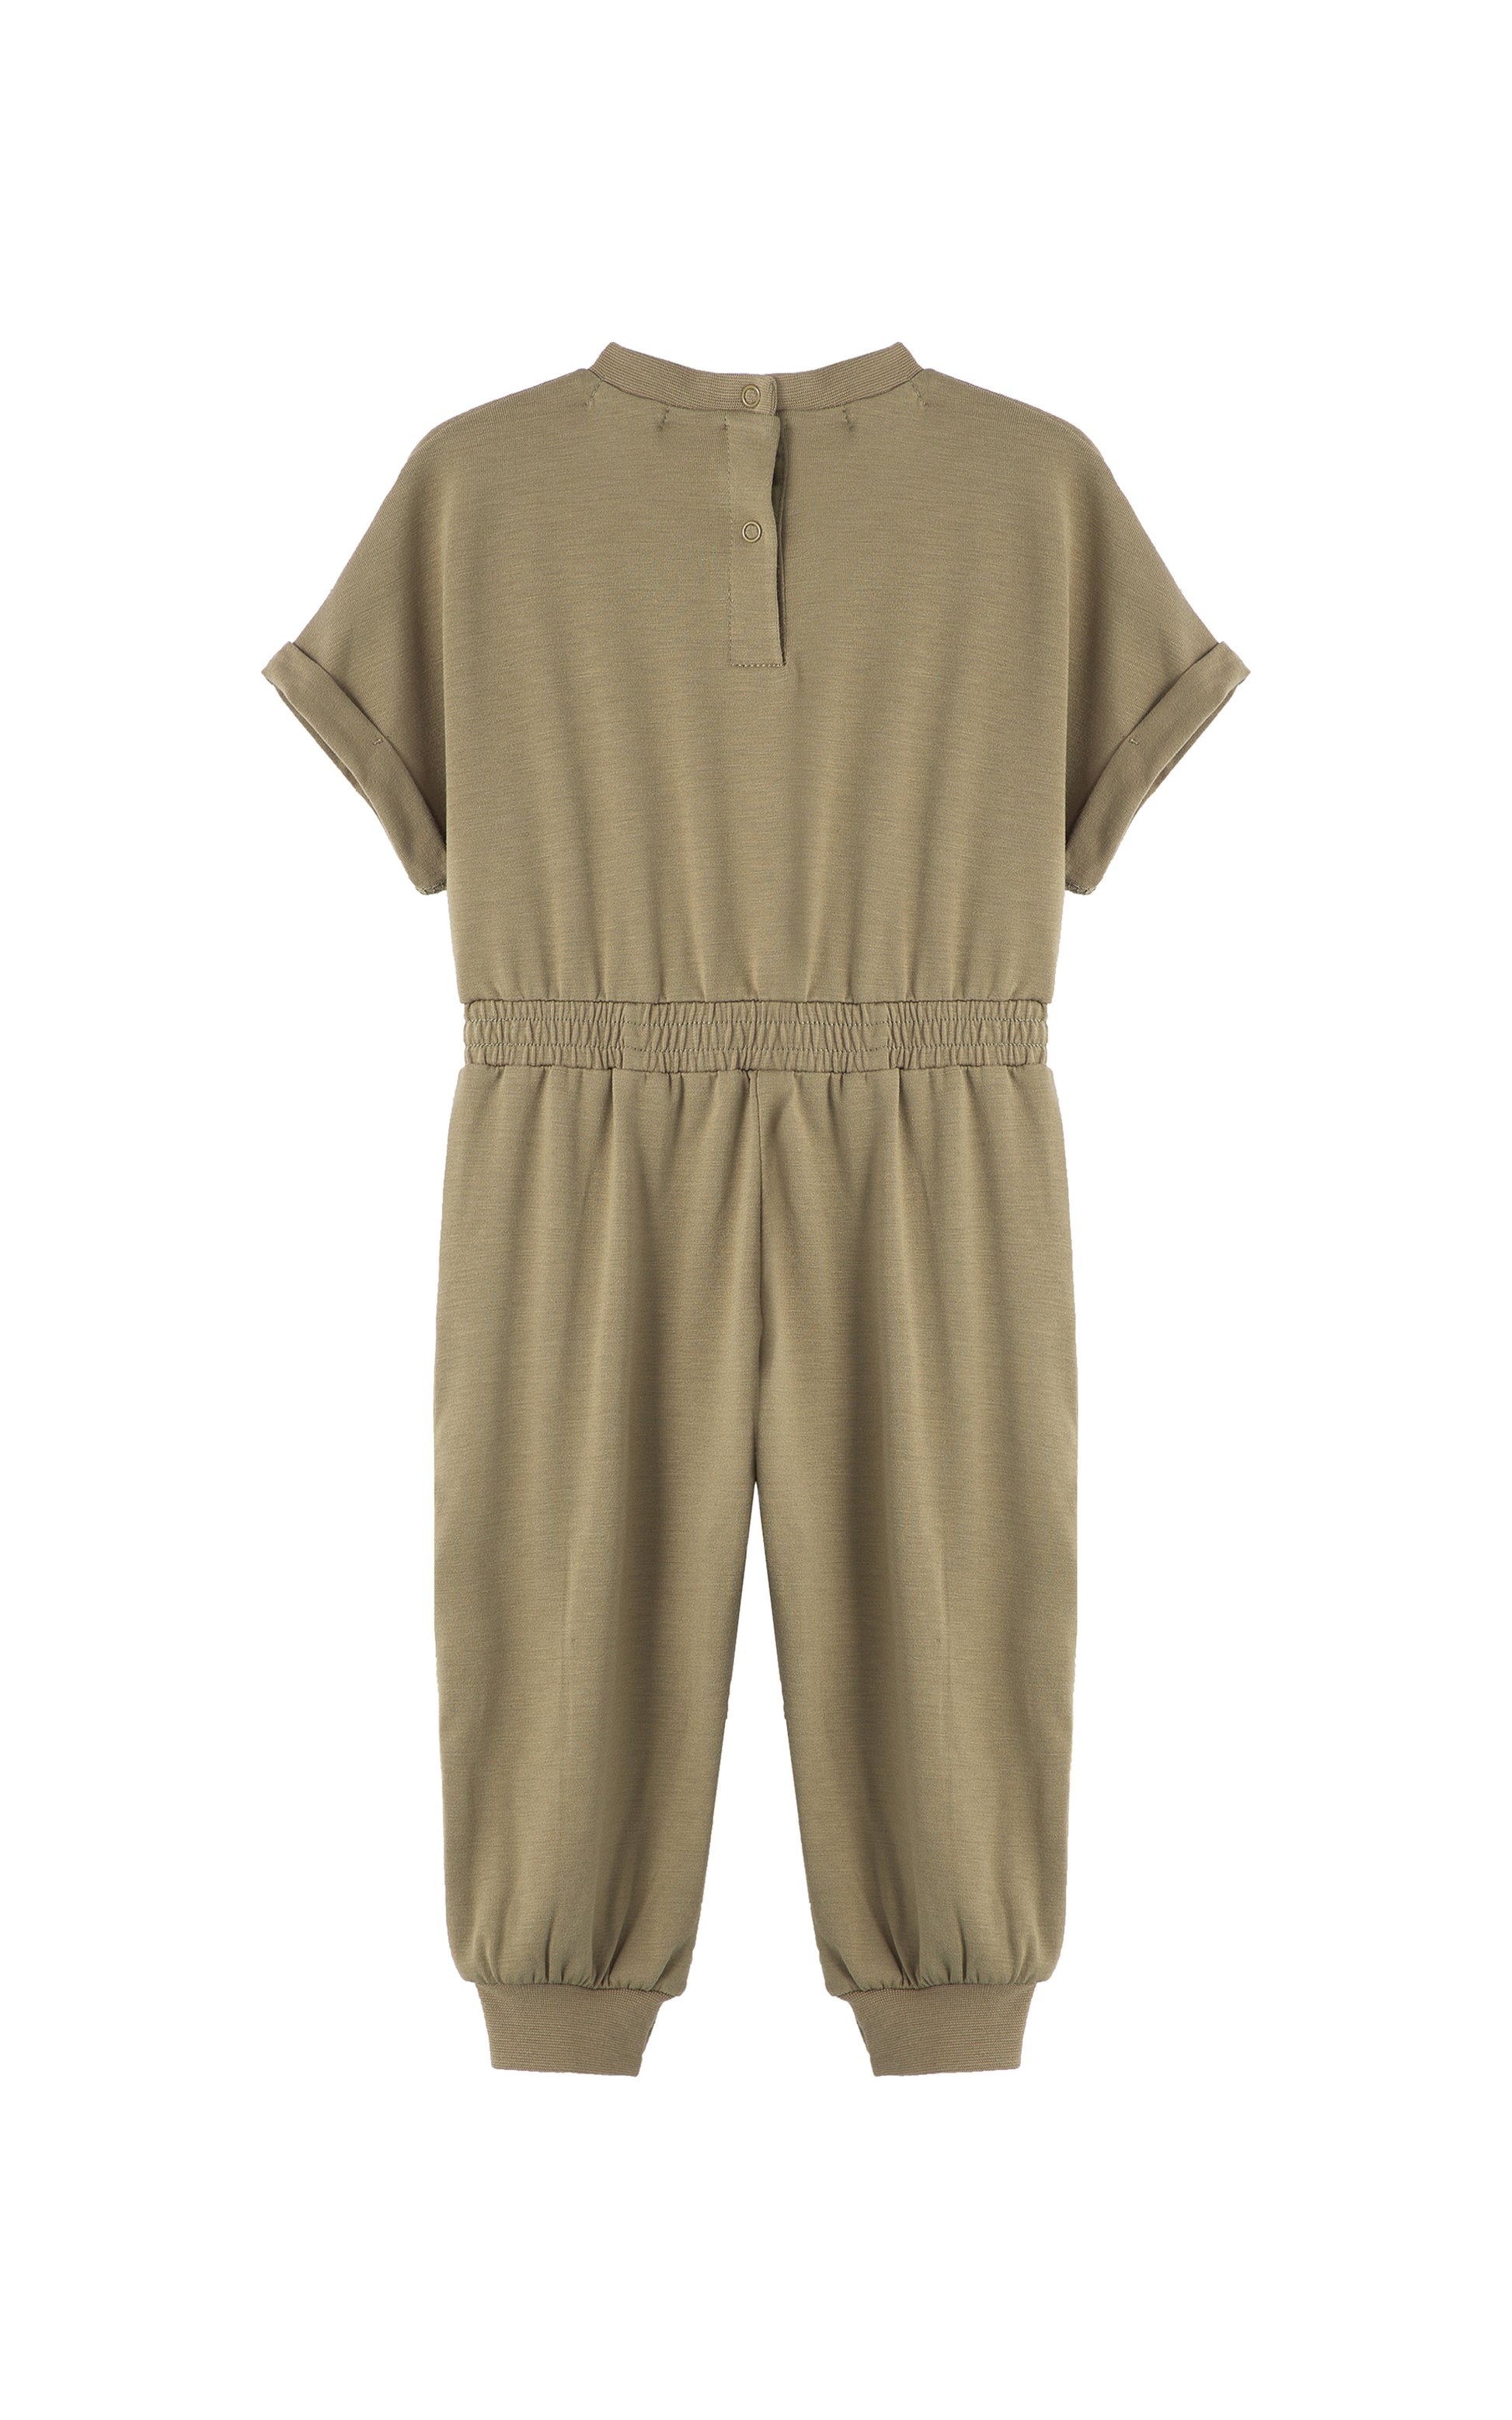 Back view of olive romper with folded cuff sleeves.